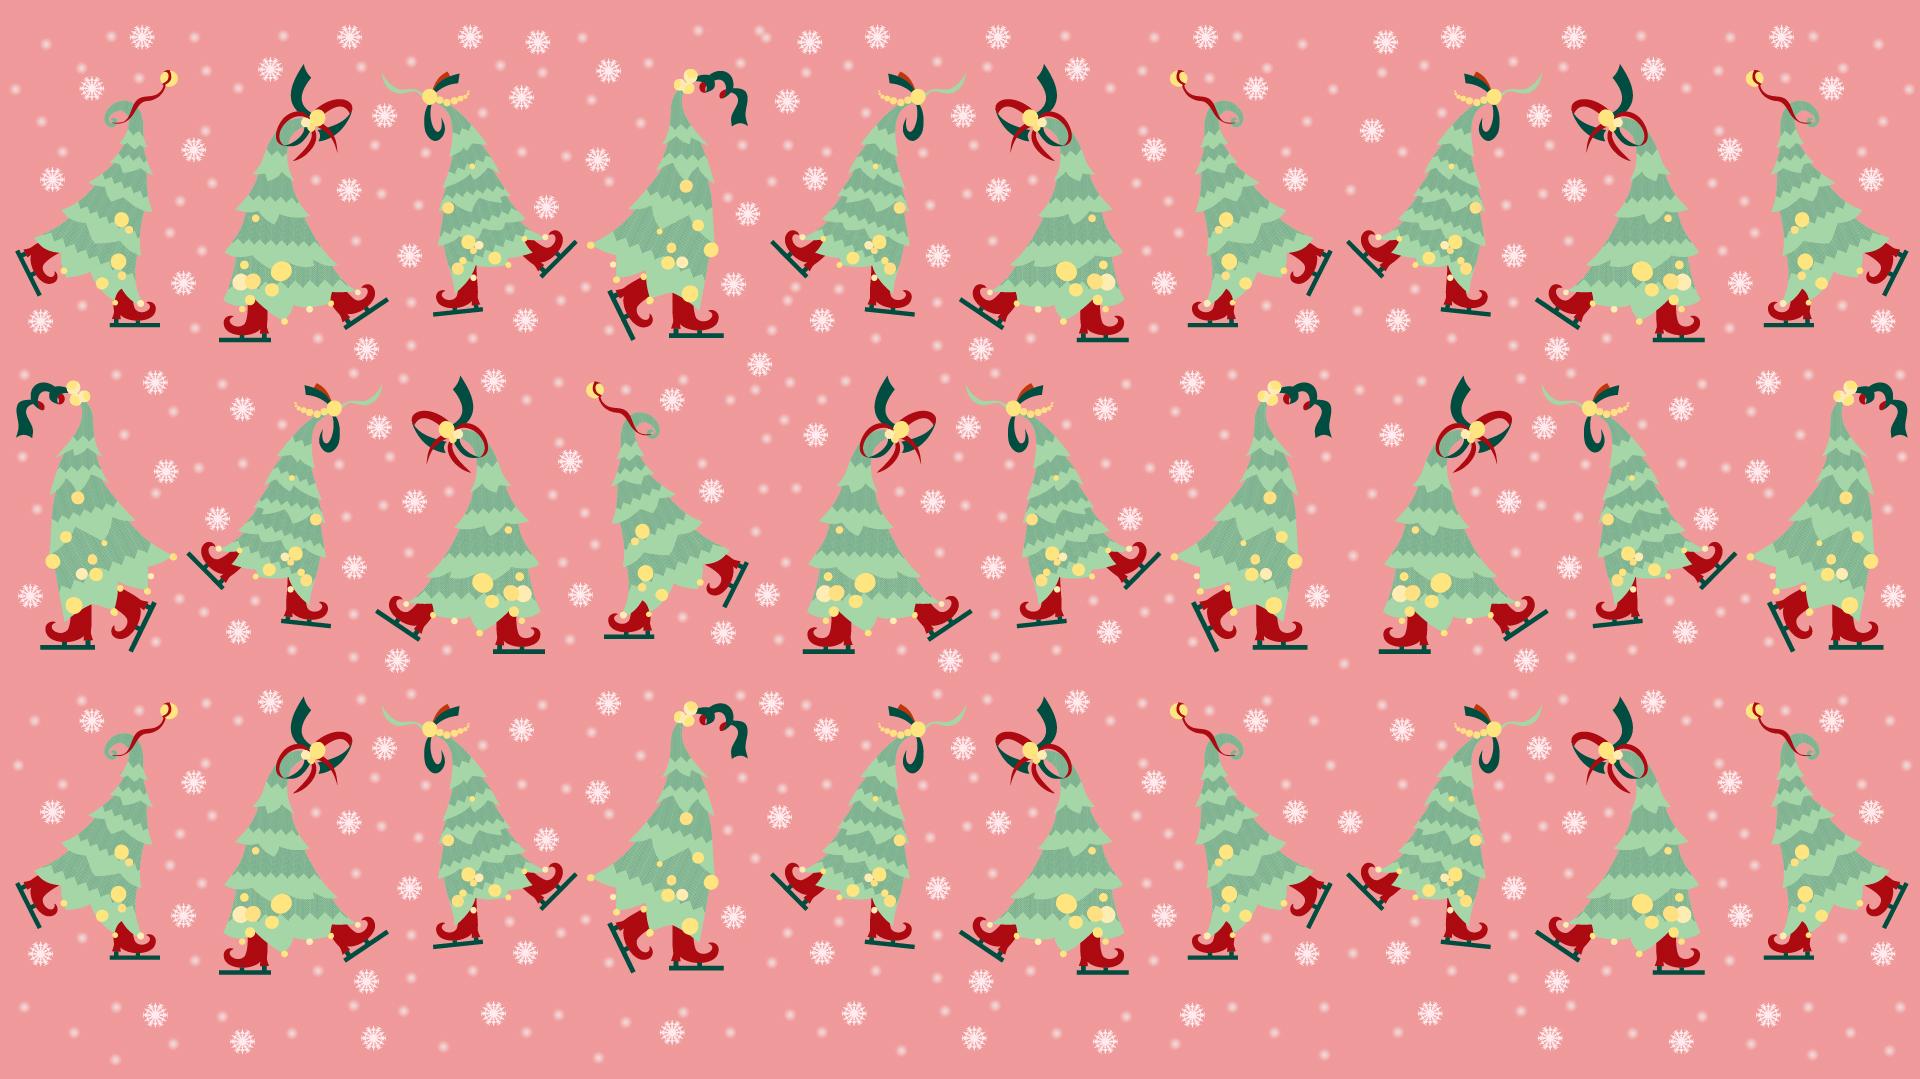 5 Free Cute Christmas Wallpapers for Laptops and Devices LoveToKnow